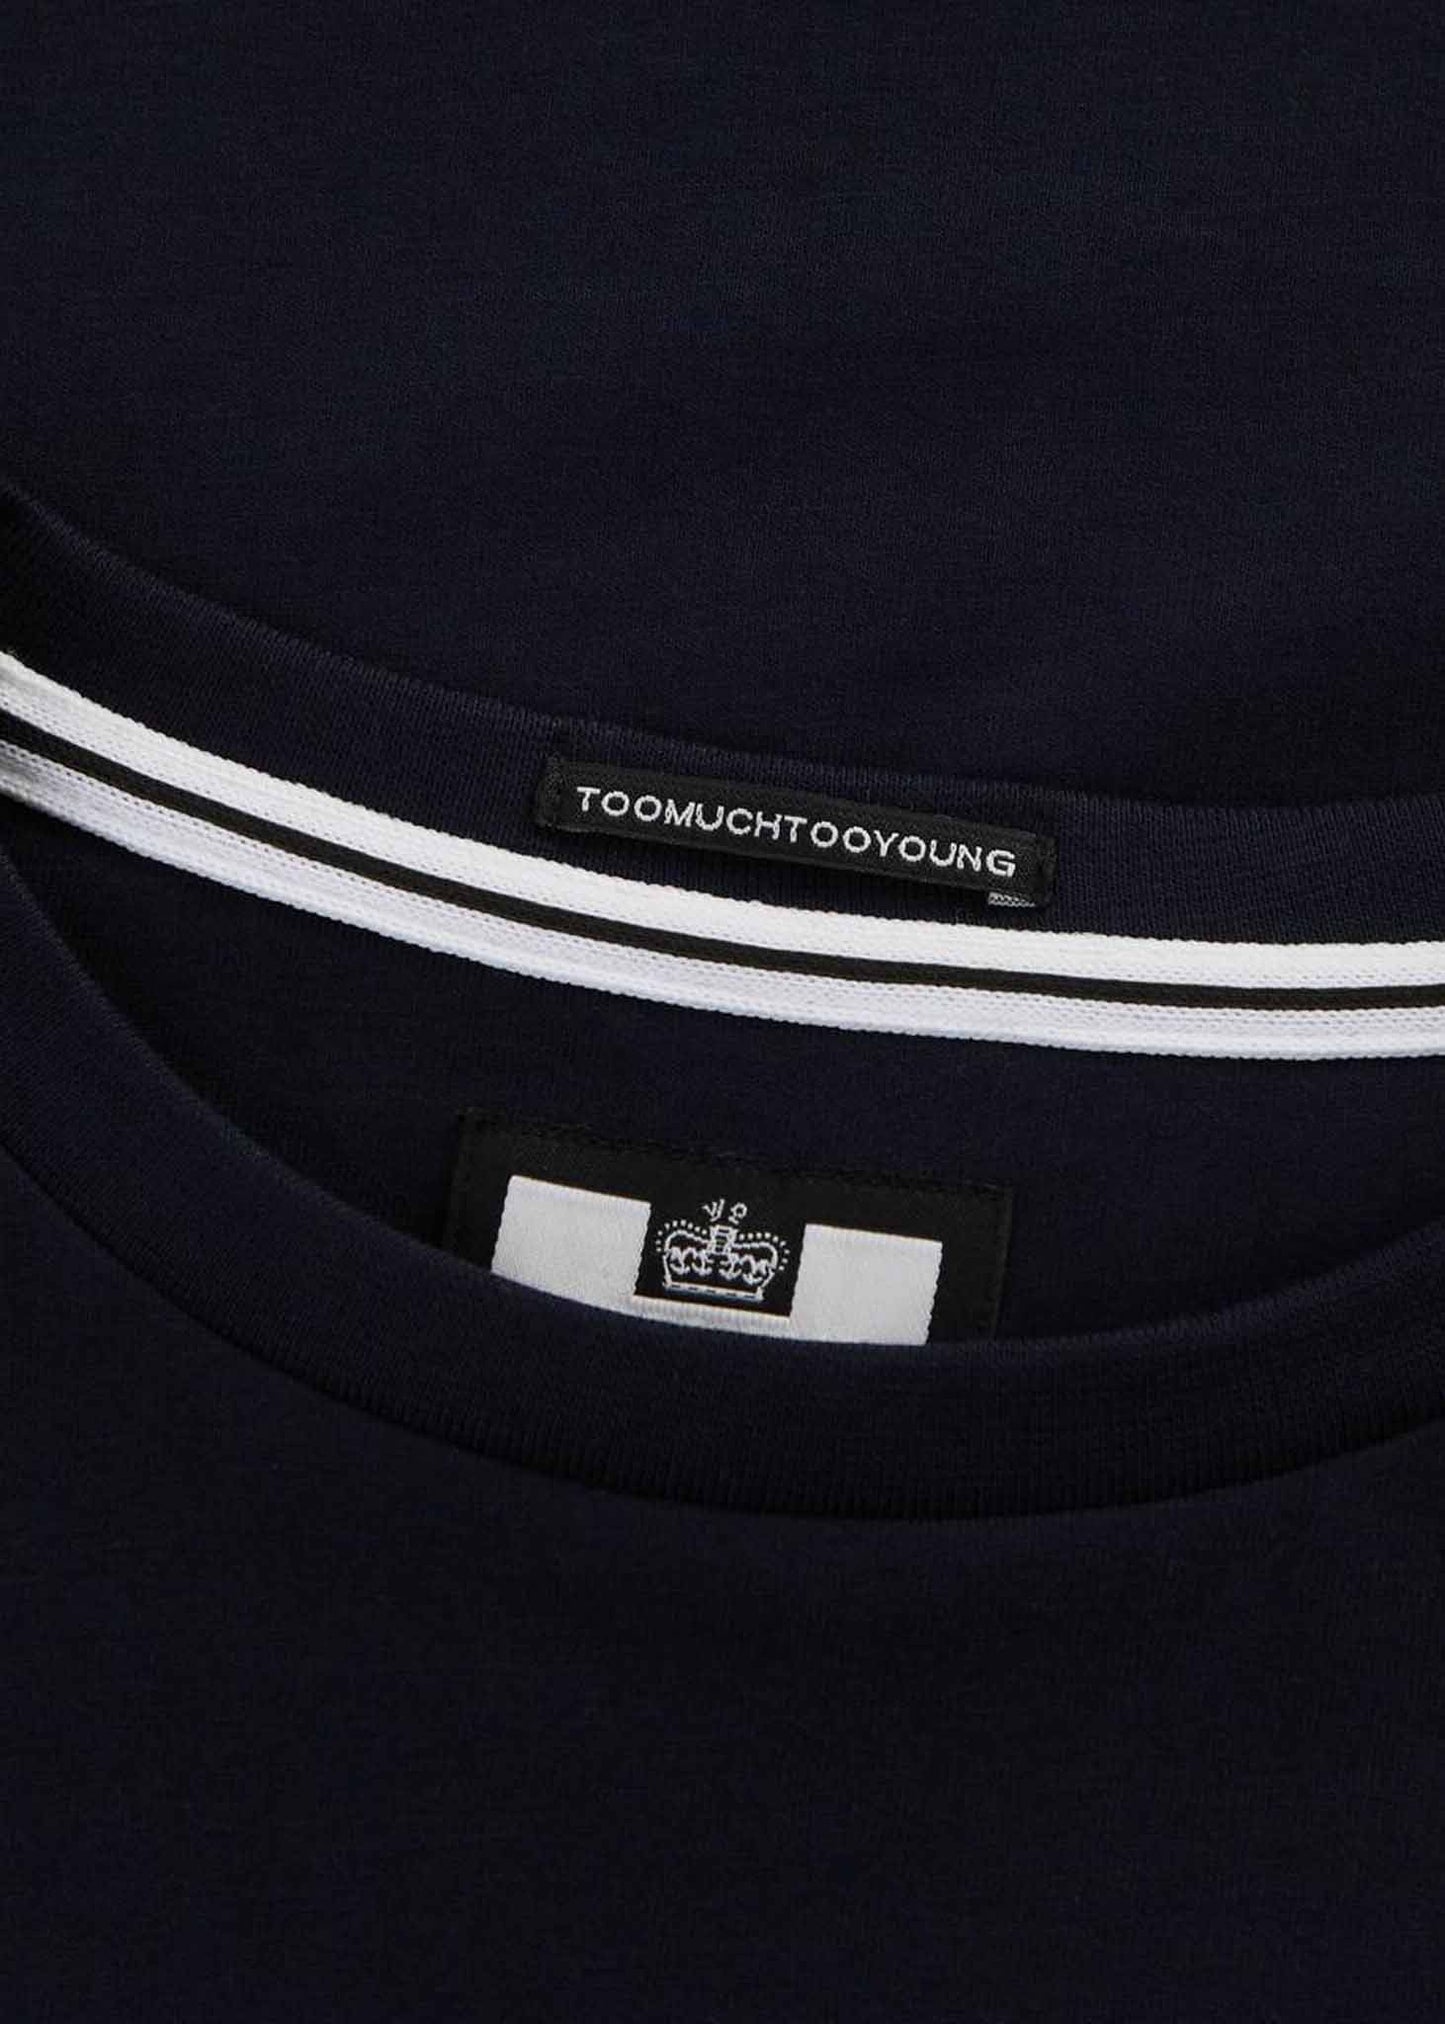 Weekend Offender T-shirts  Leo gregory - navy 